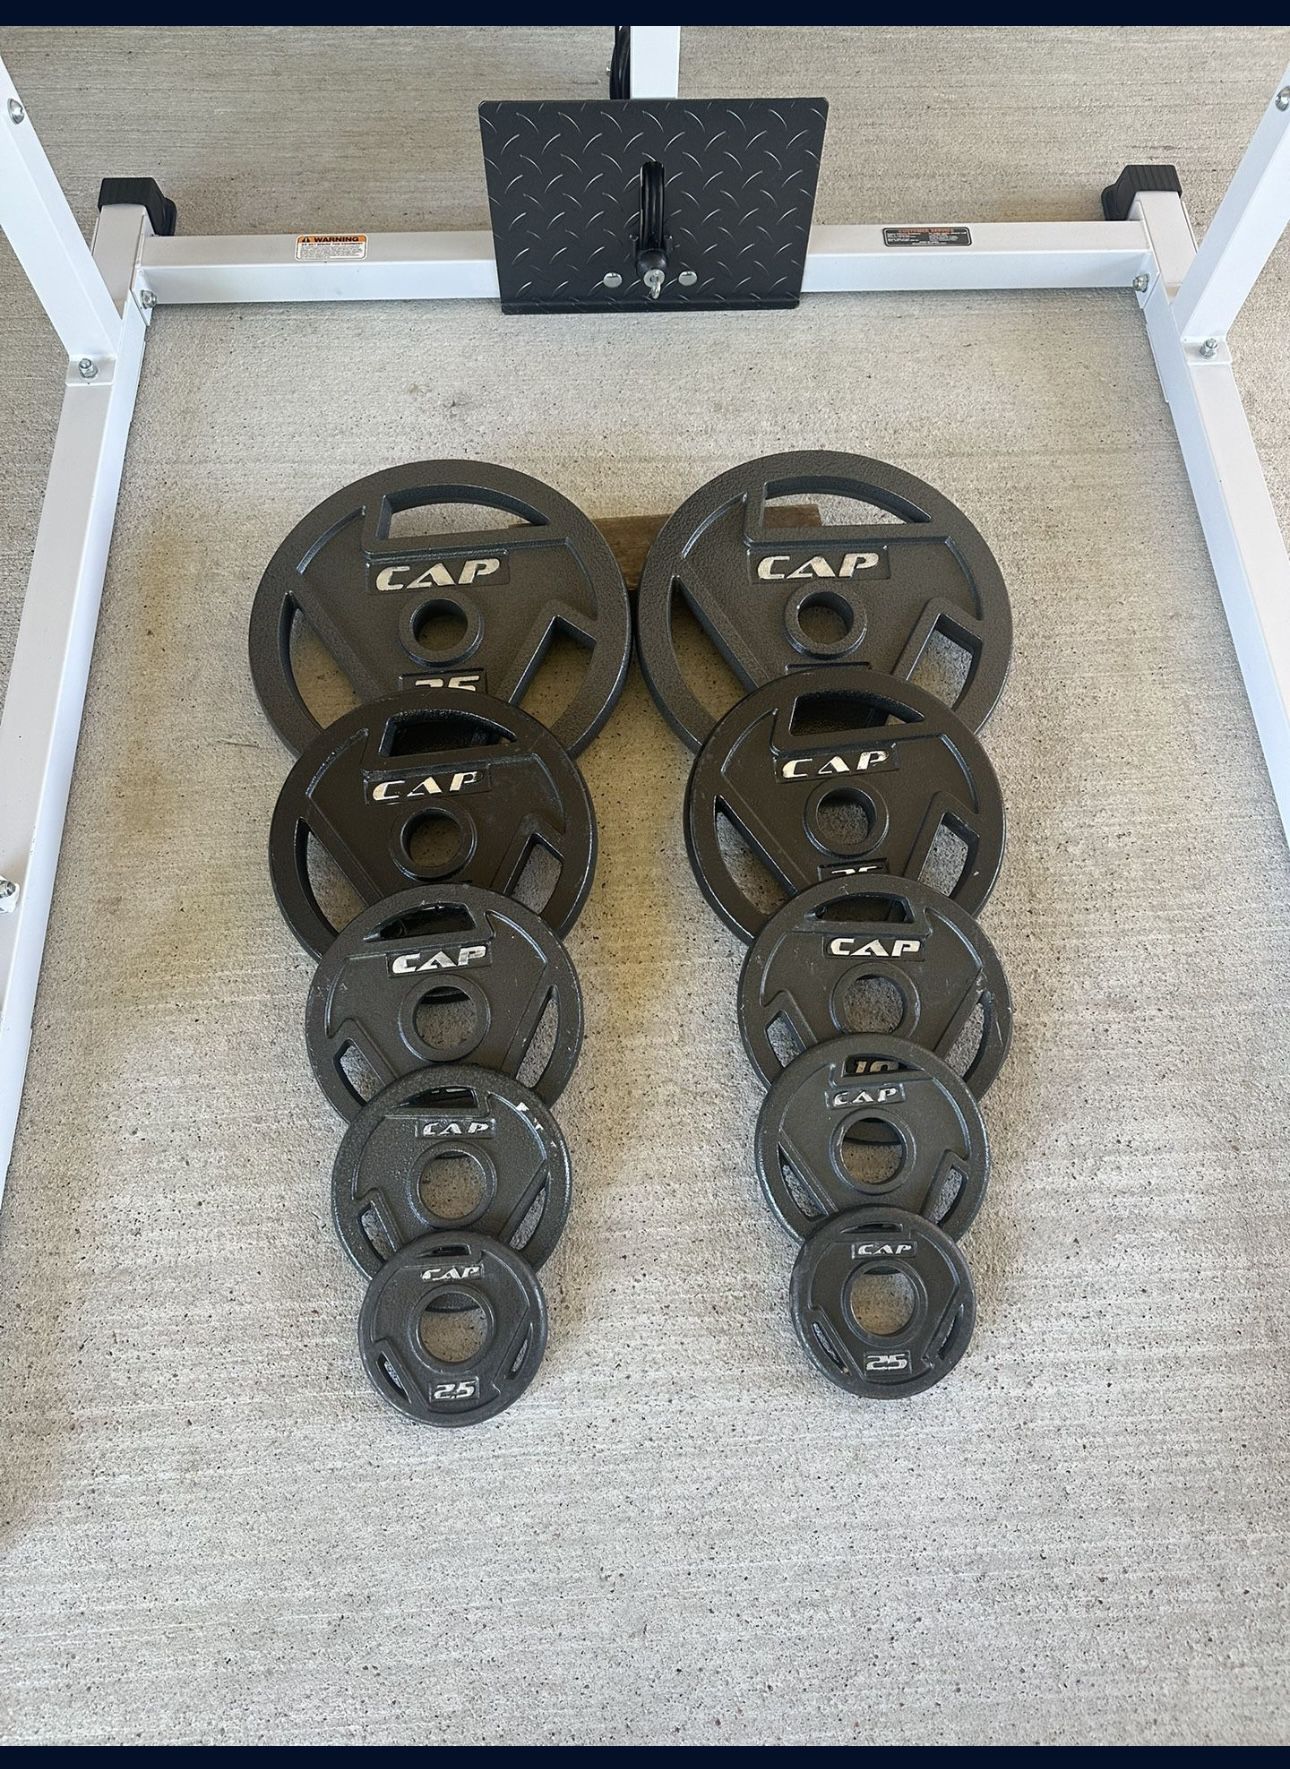 Cap Olympic Barbell Grip Weight Plates $185  